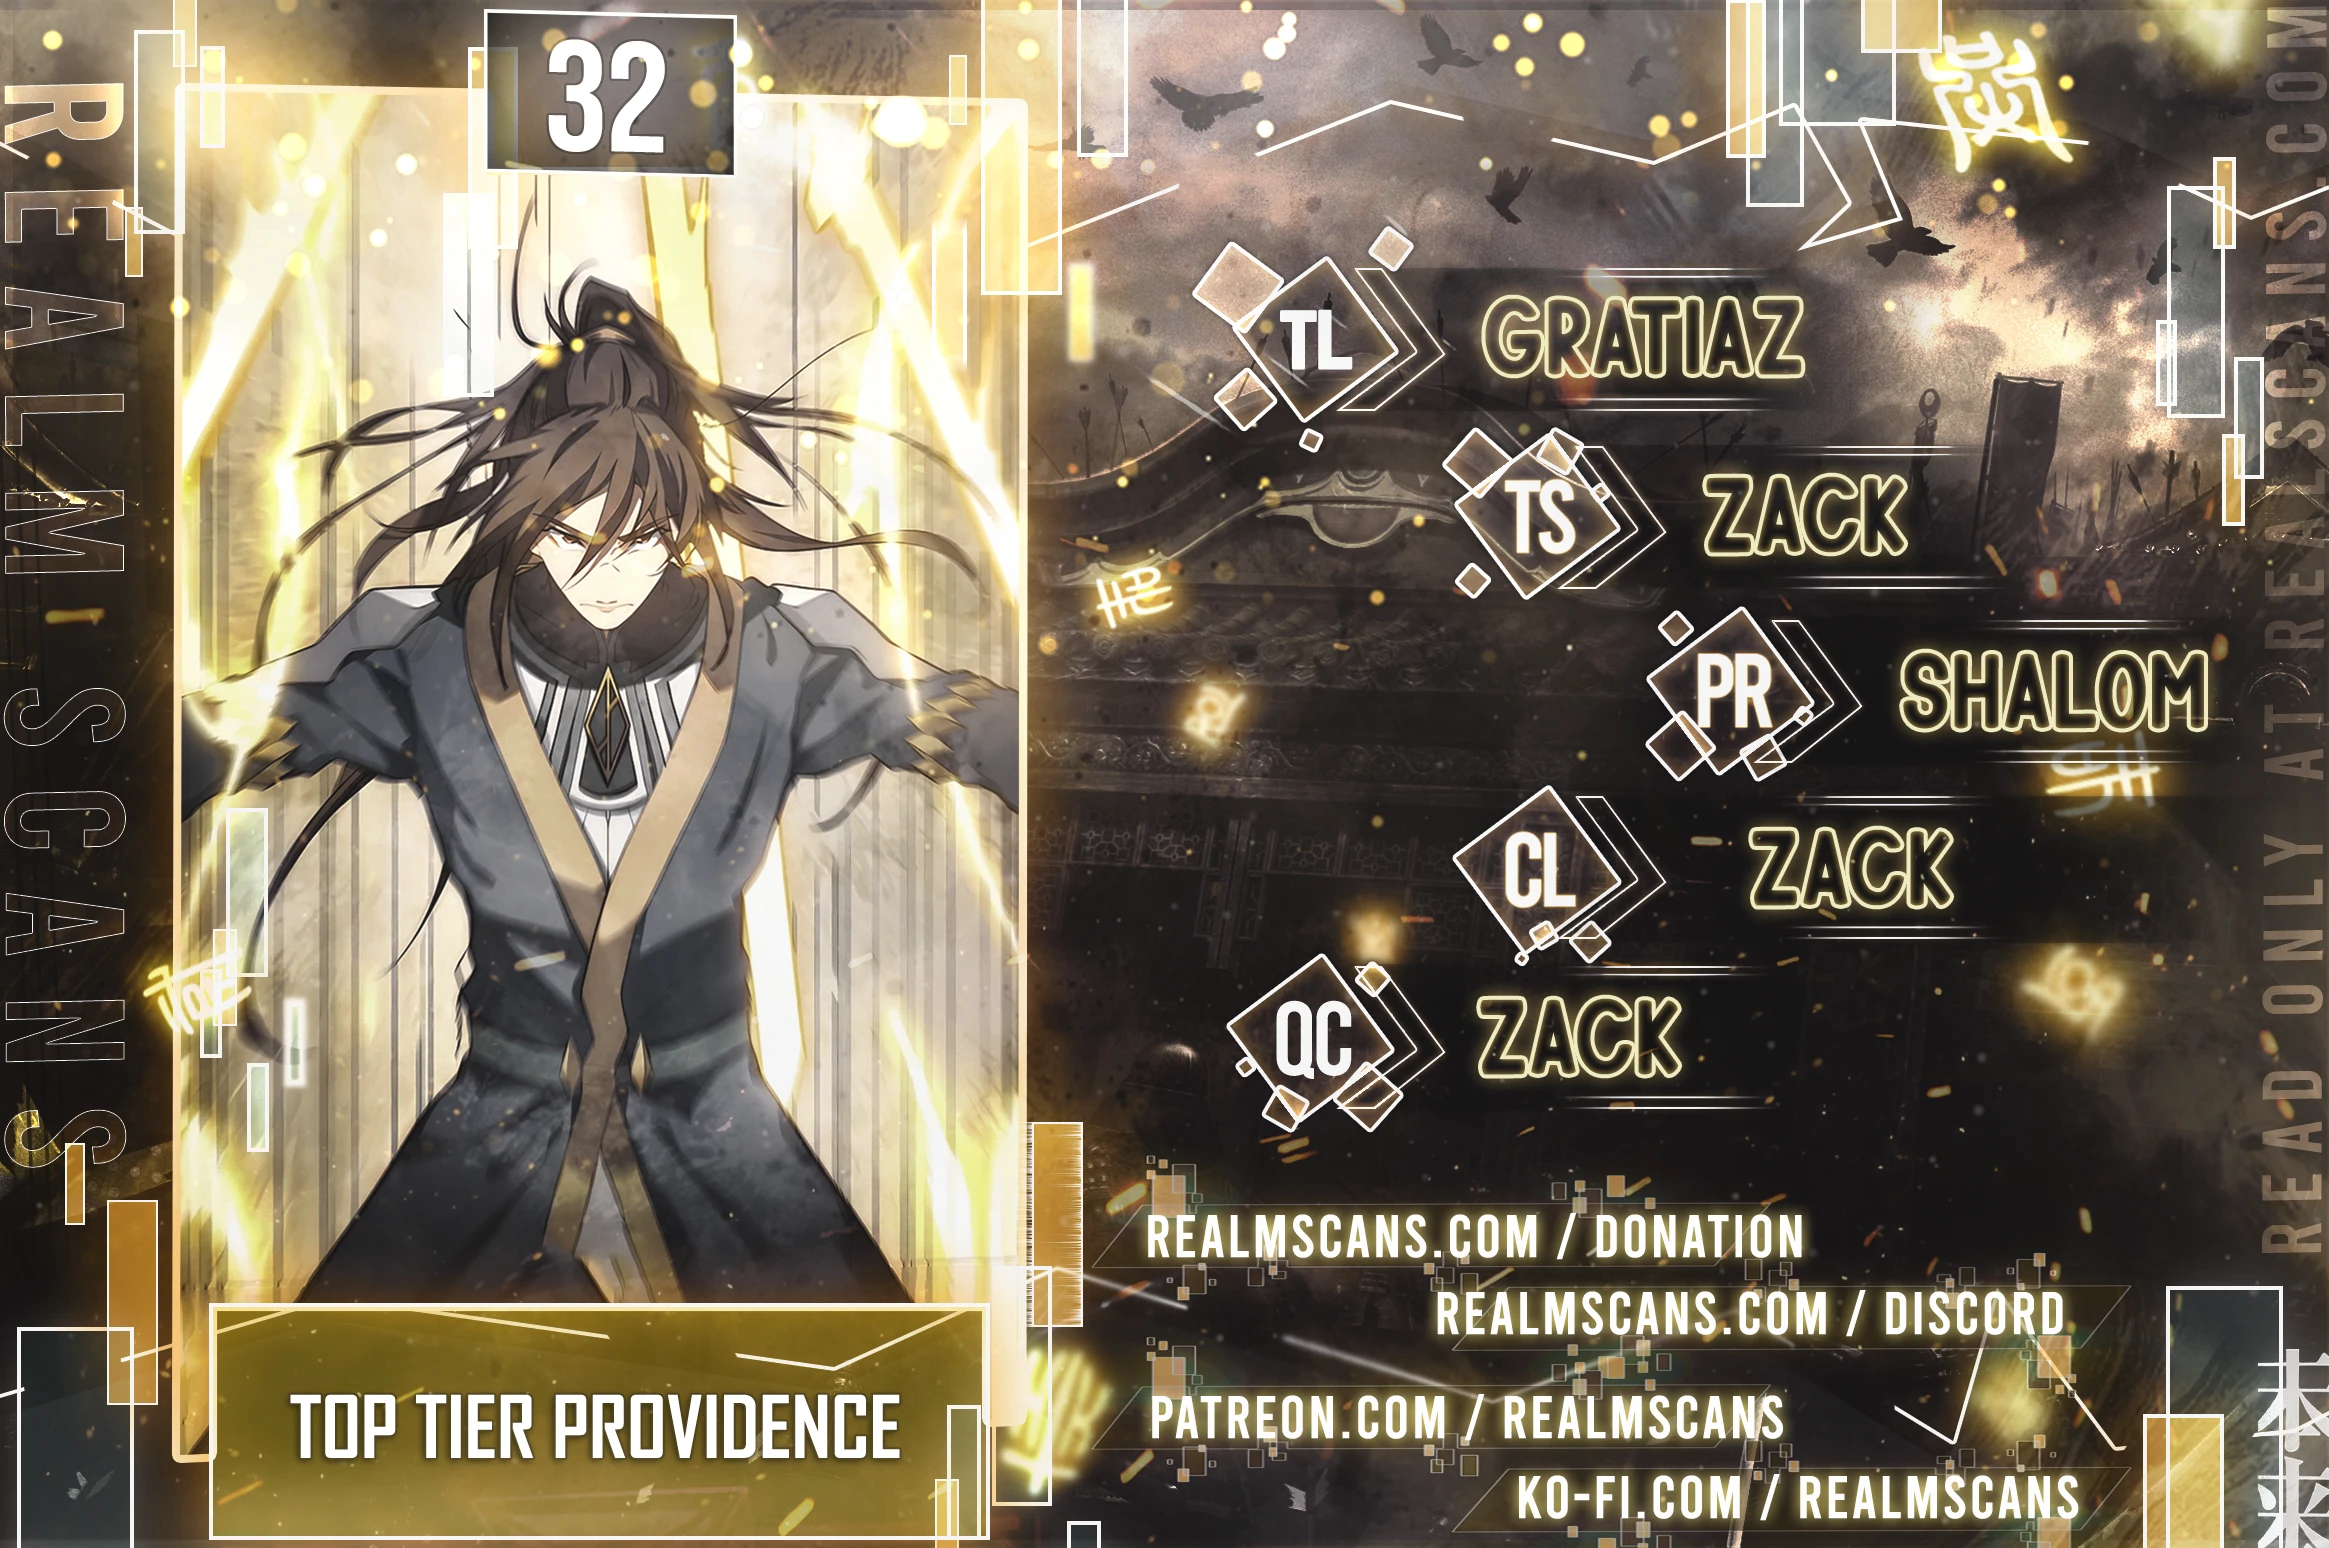 Top Tier Providence - Chapter 25088 - Sending you on your way - Image 1